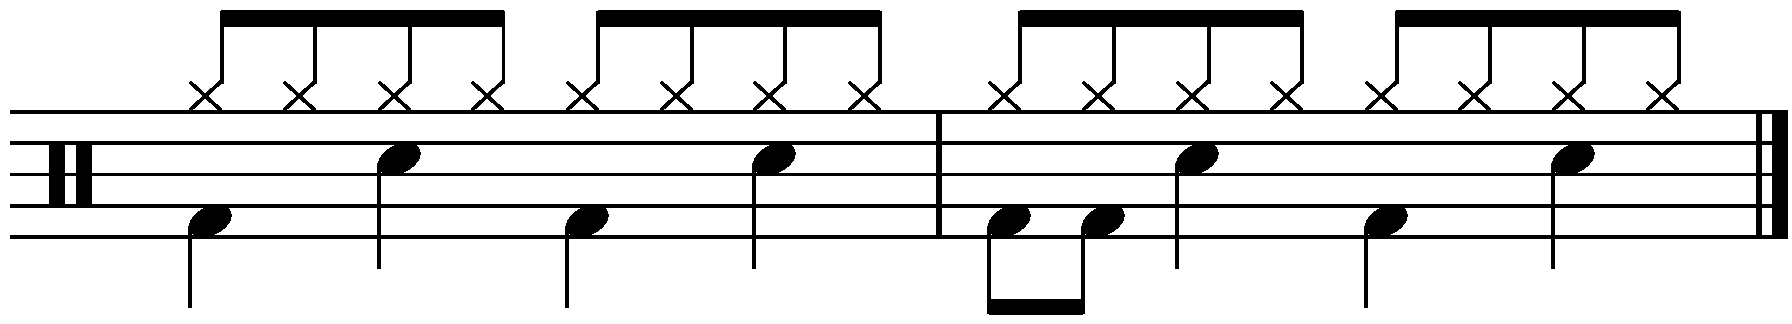 2 Bar Grooves - Example 1b